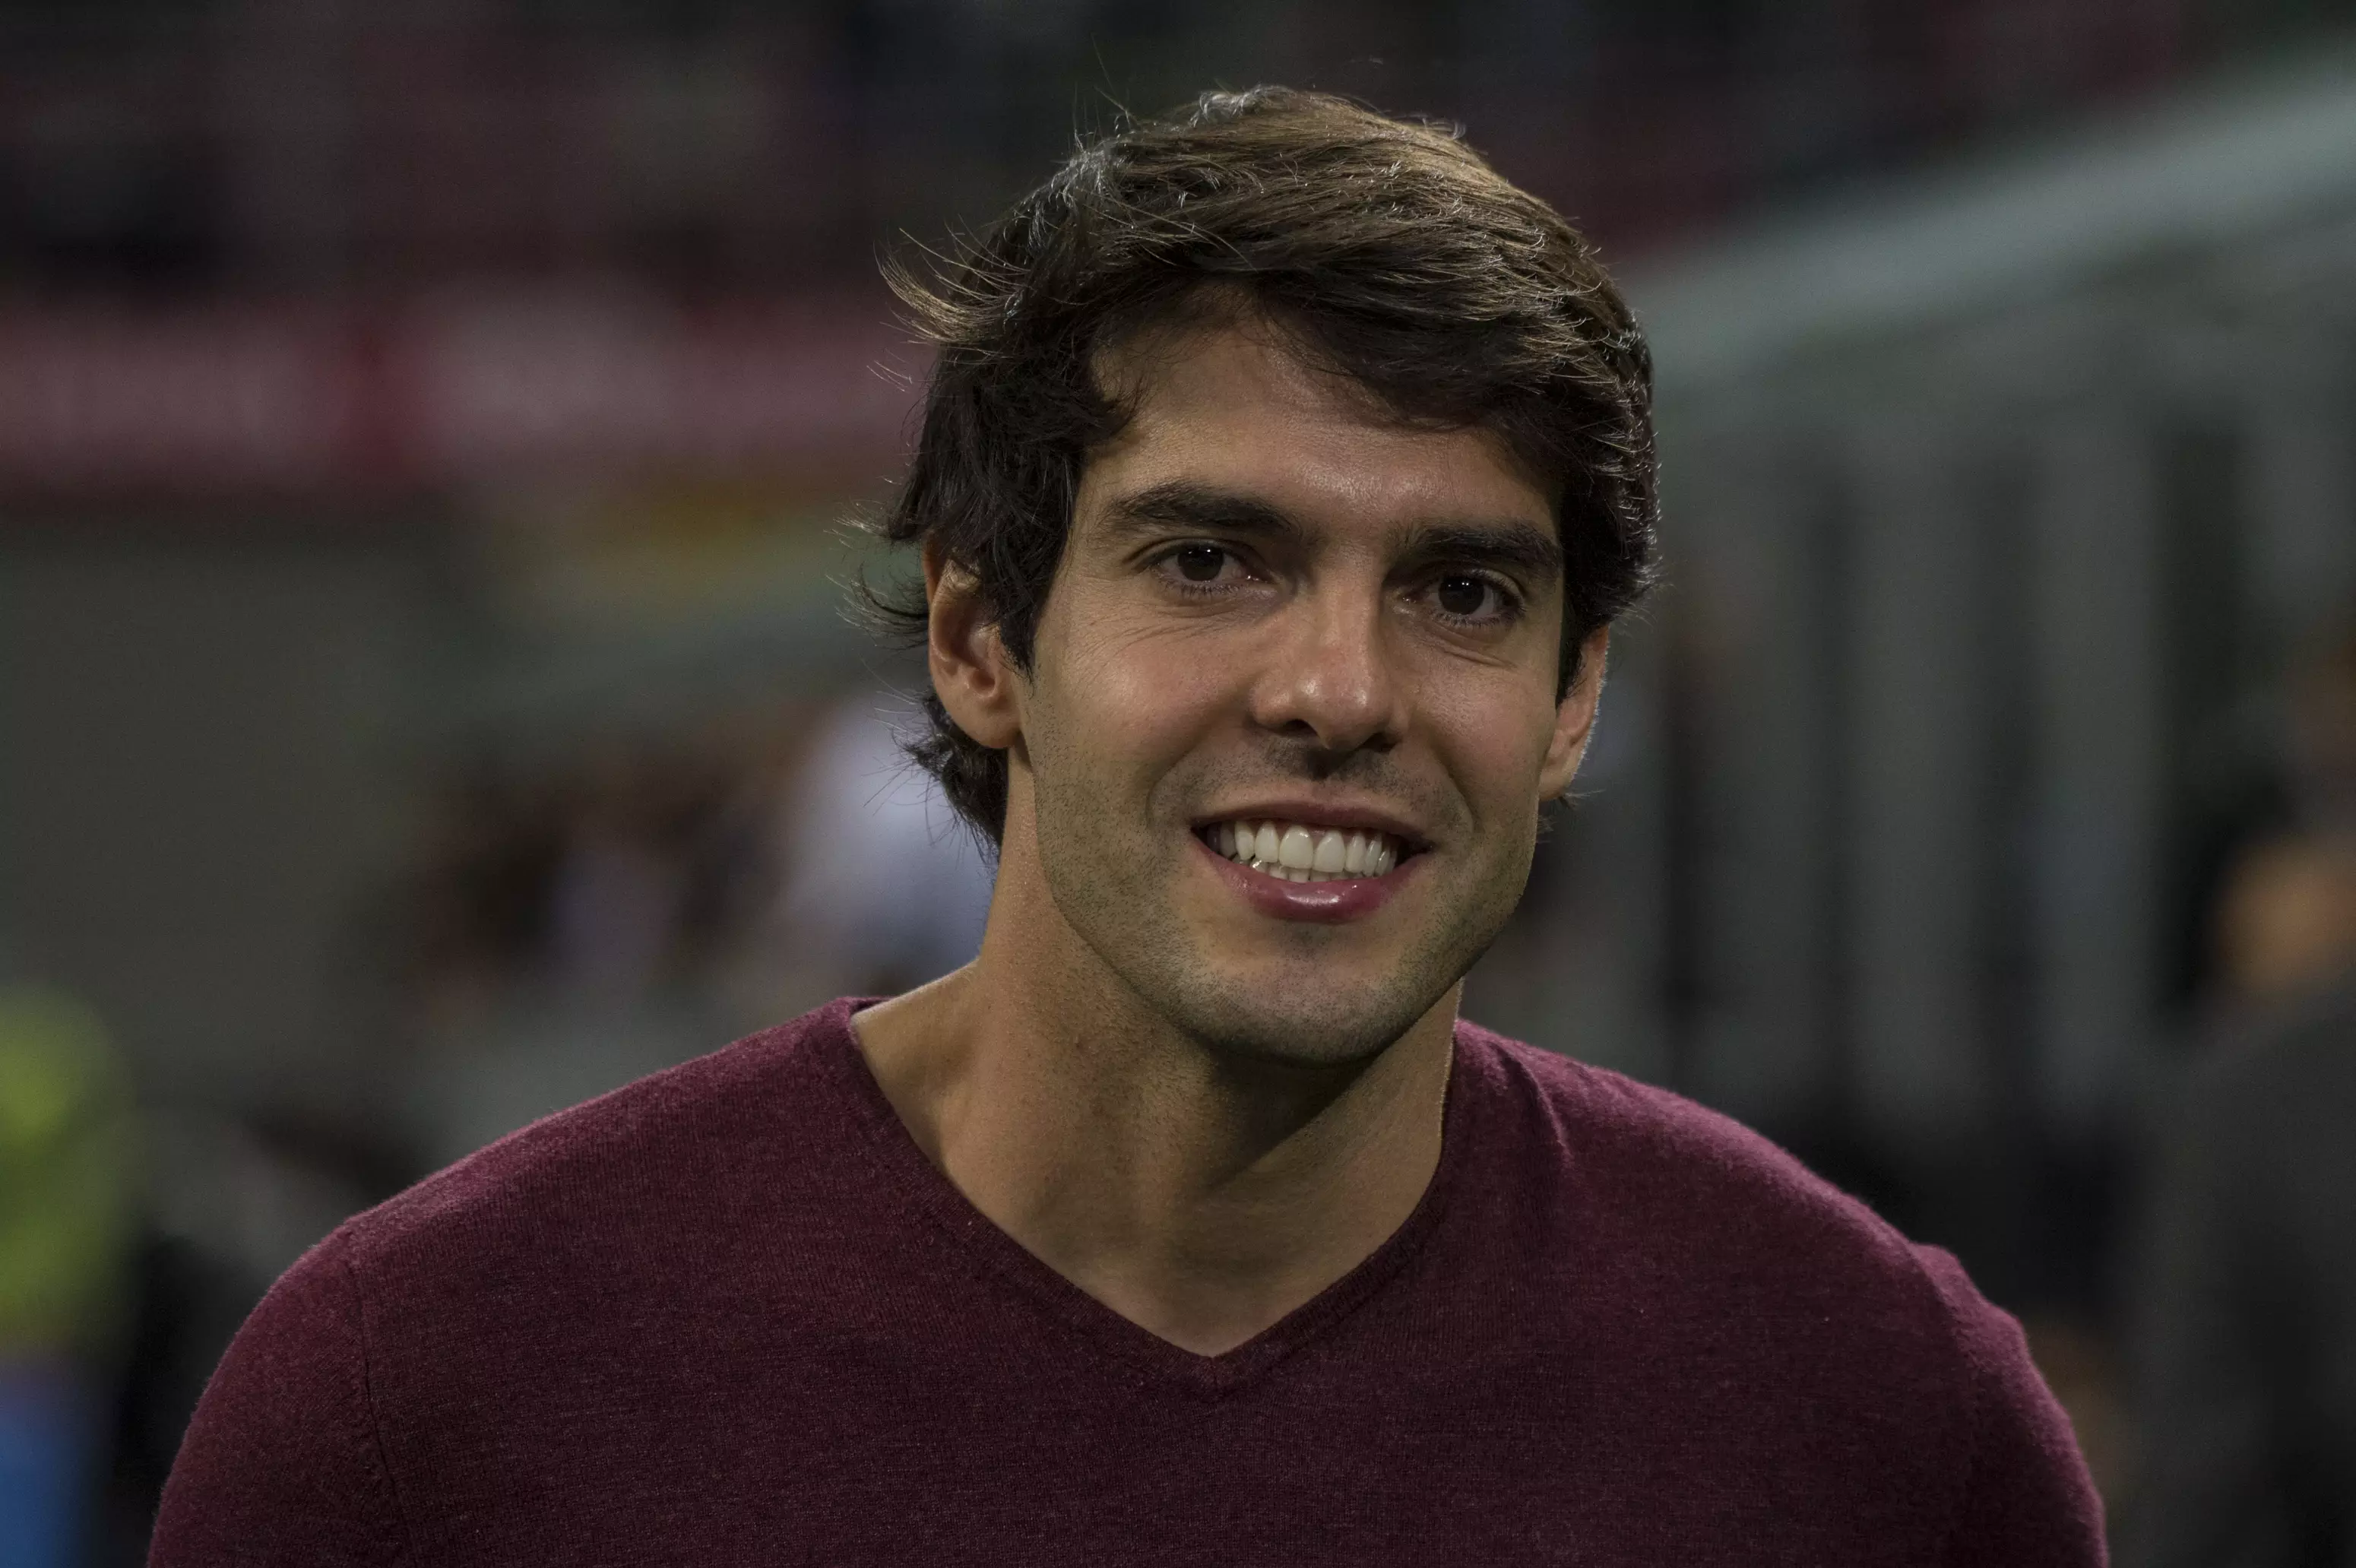 Kaka is now back at Milan behind the scenes. Image: PA Images